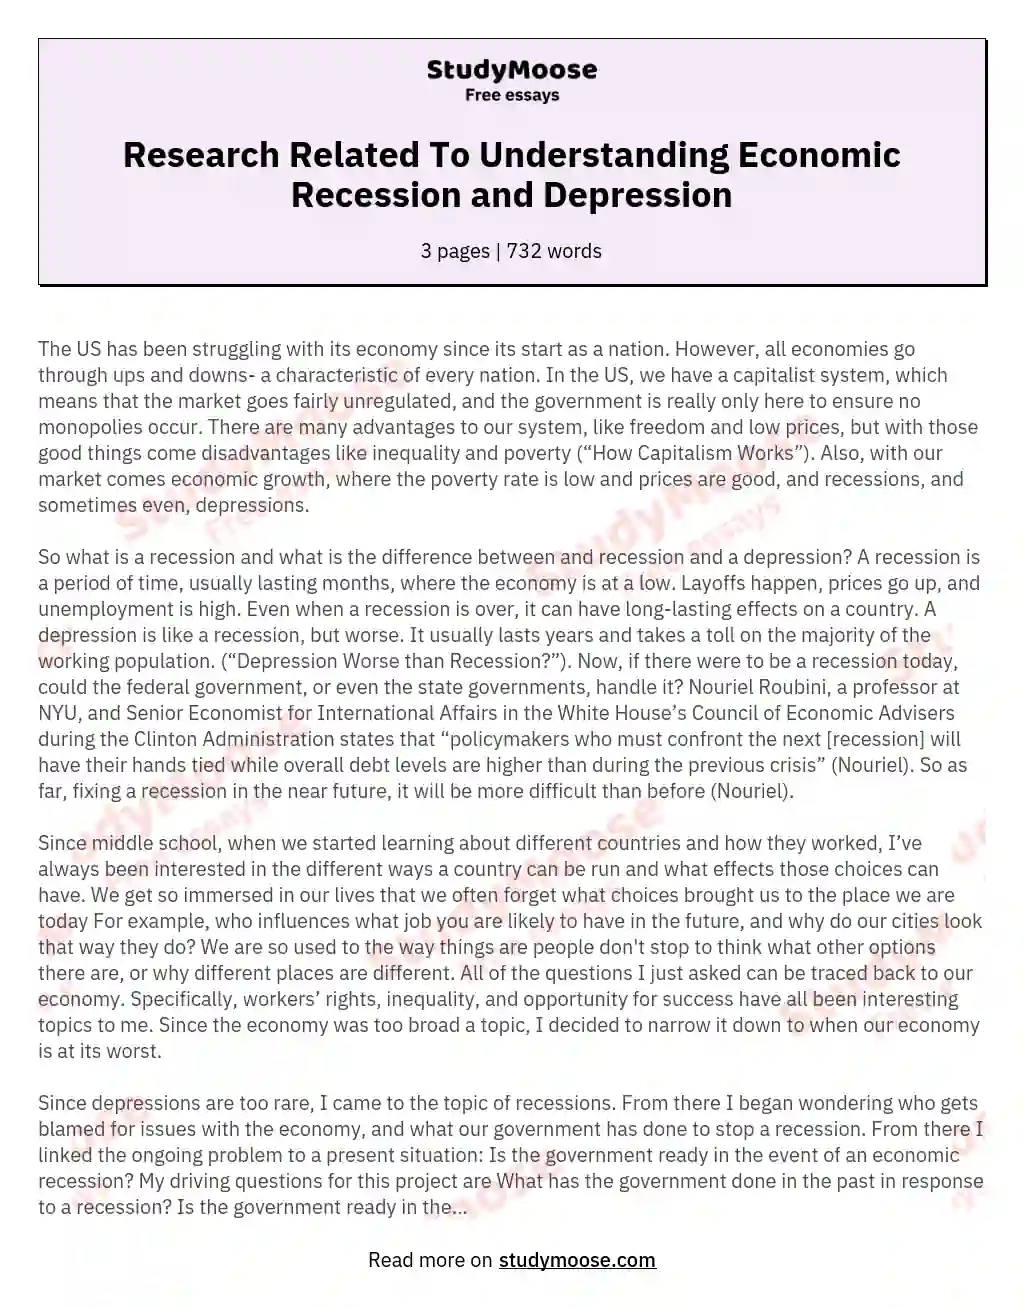 Research Related To Understanding Economic Recession and Depression essay